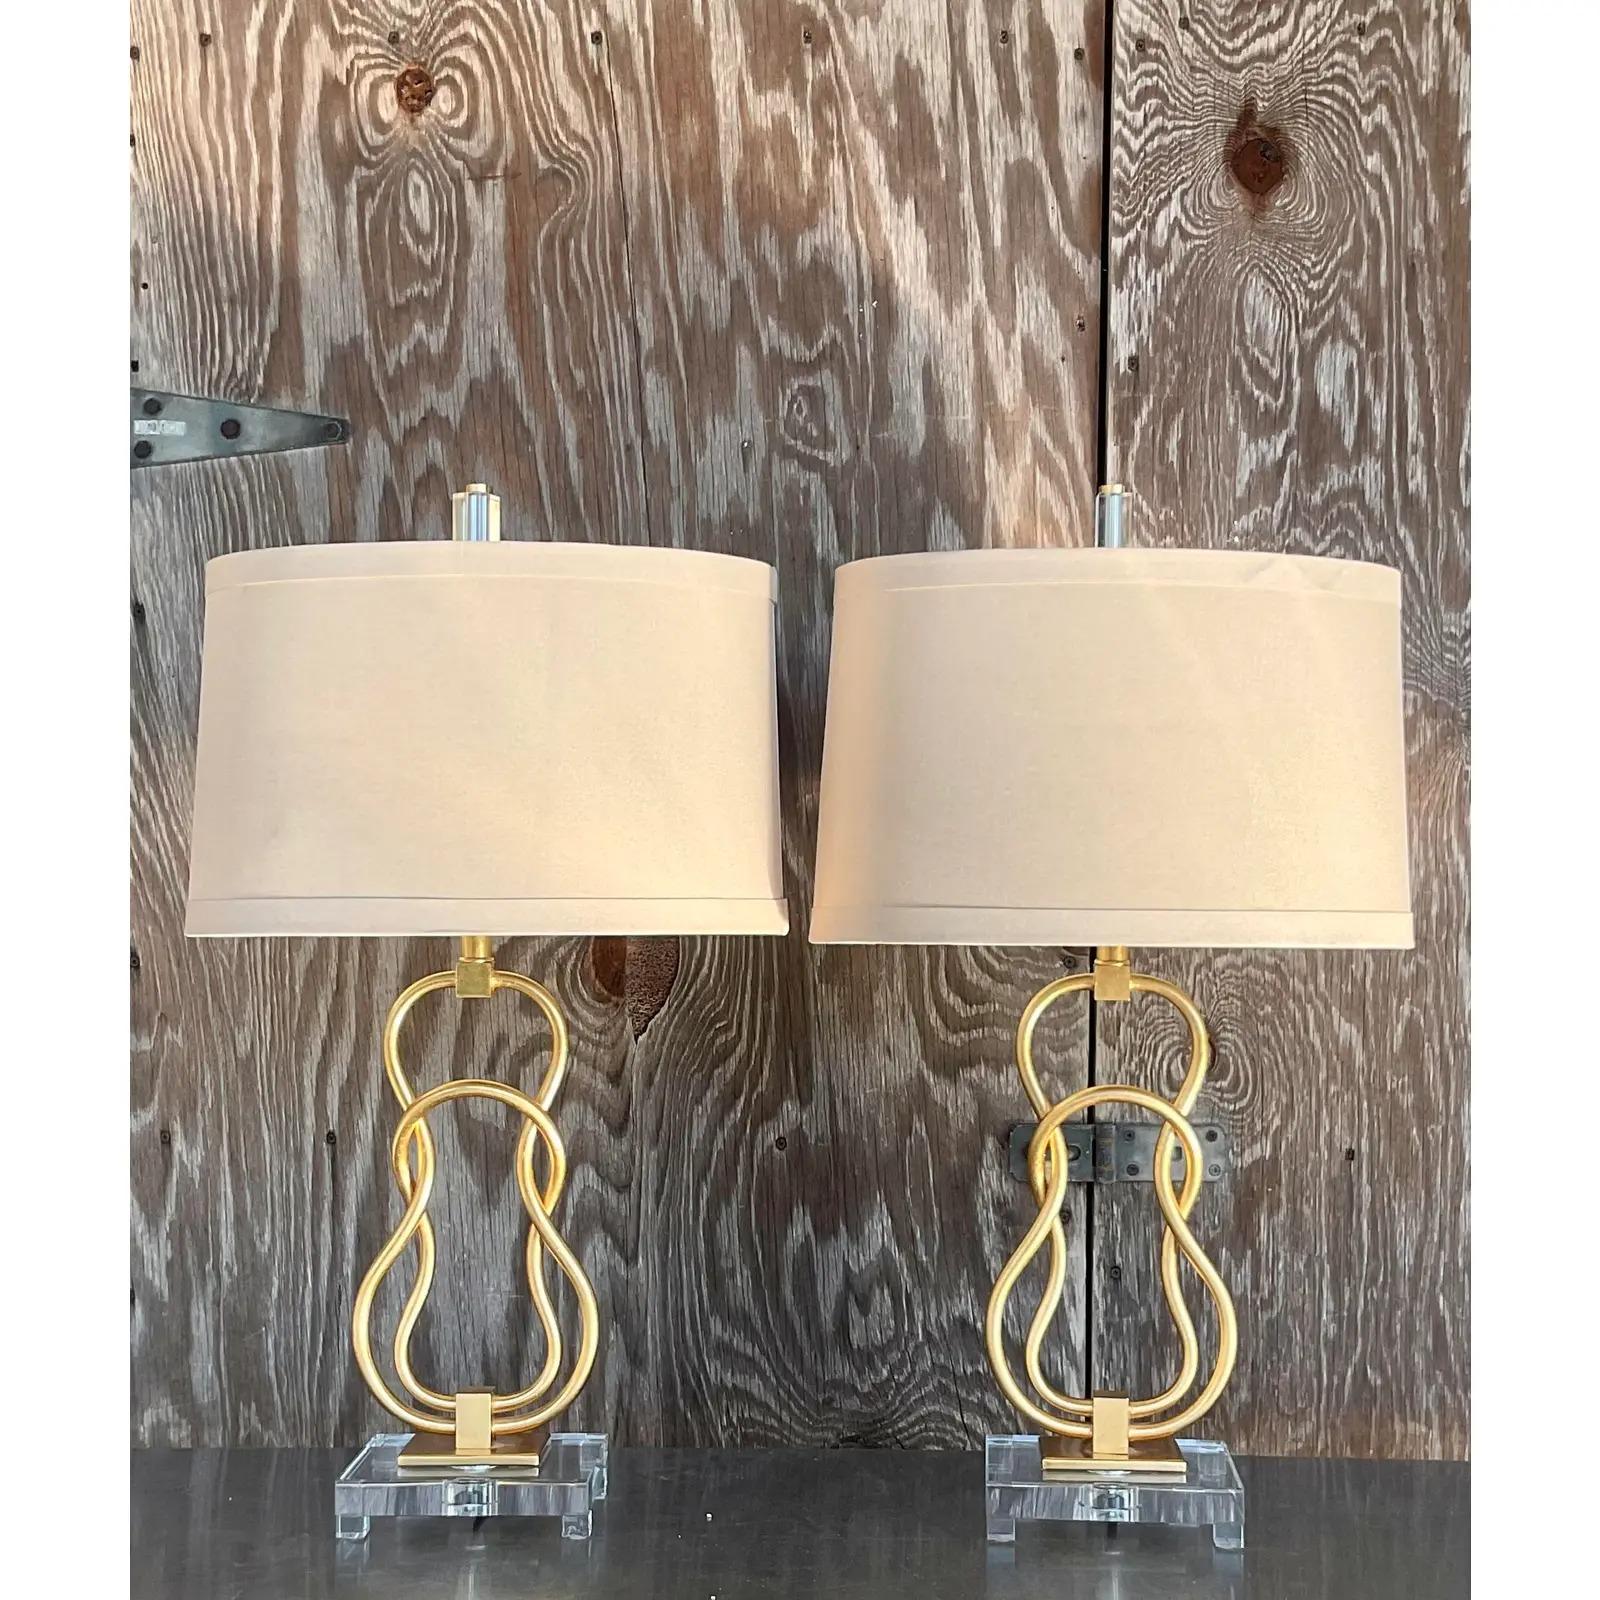 Vintage Contemporary Linked Gilt Rings Lamps - a Pair For Sale 4